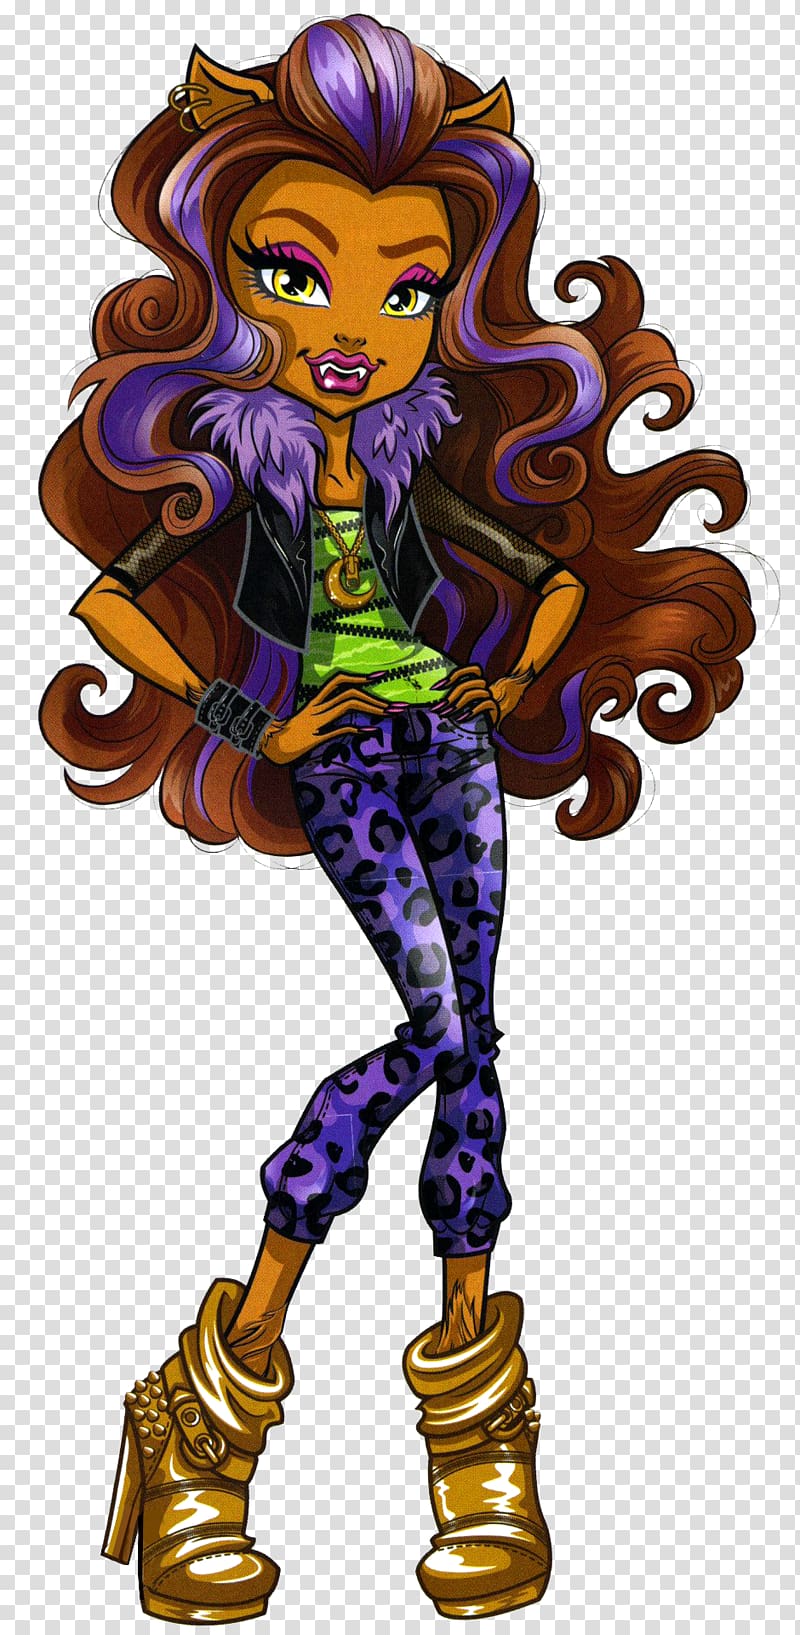 Gray wolf Clawdeen Wolf Frankie Stein Cleo DeNile Monster High, doll transparent background PNG clipart